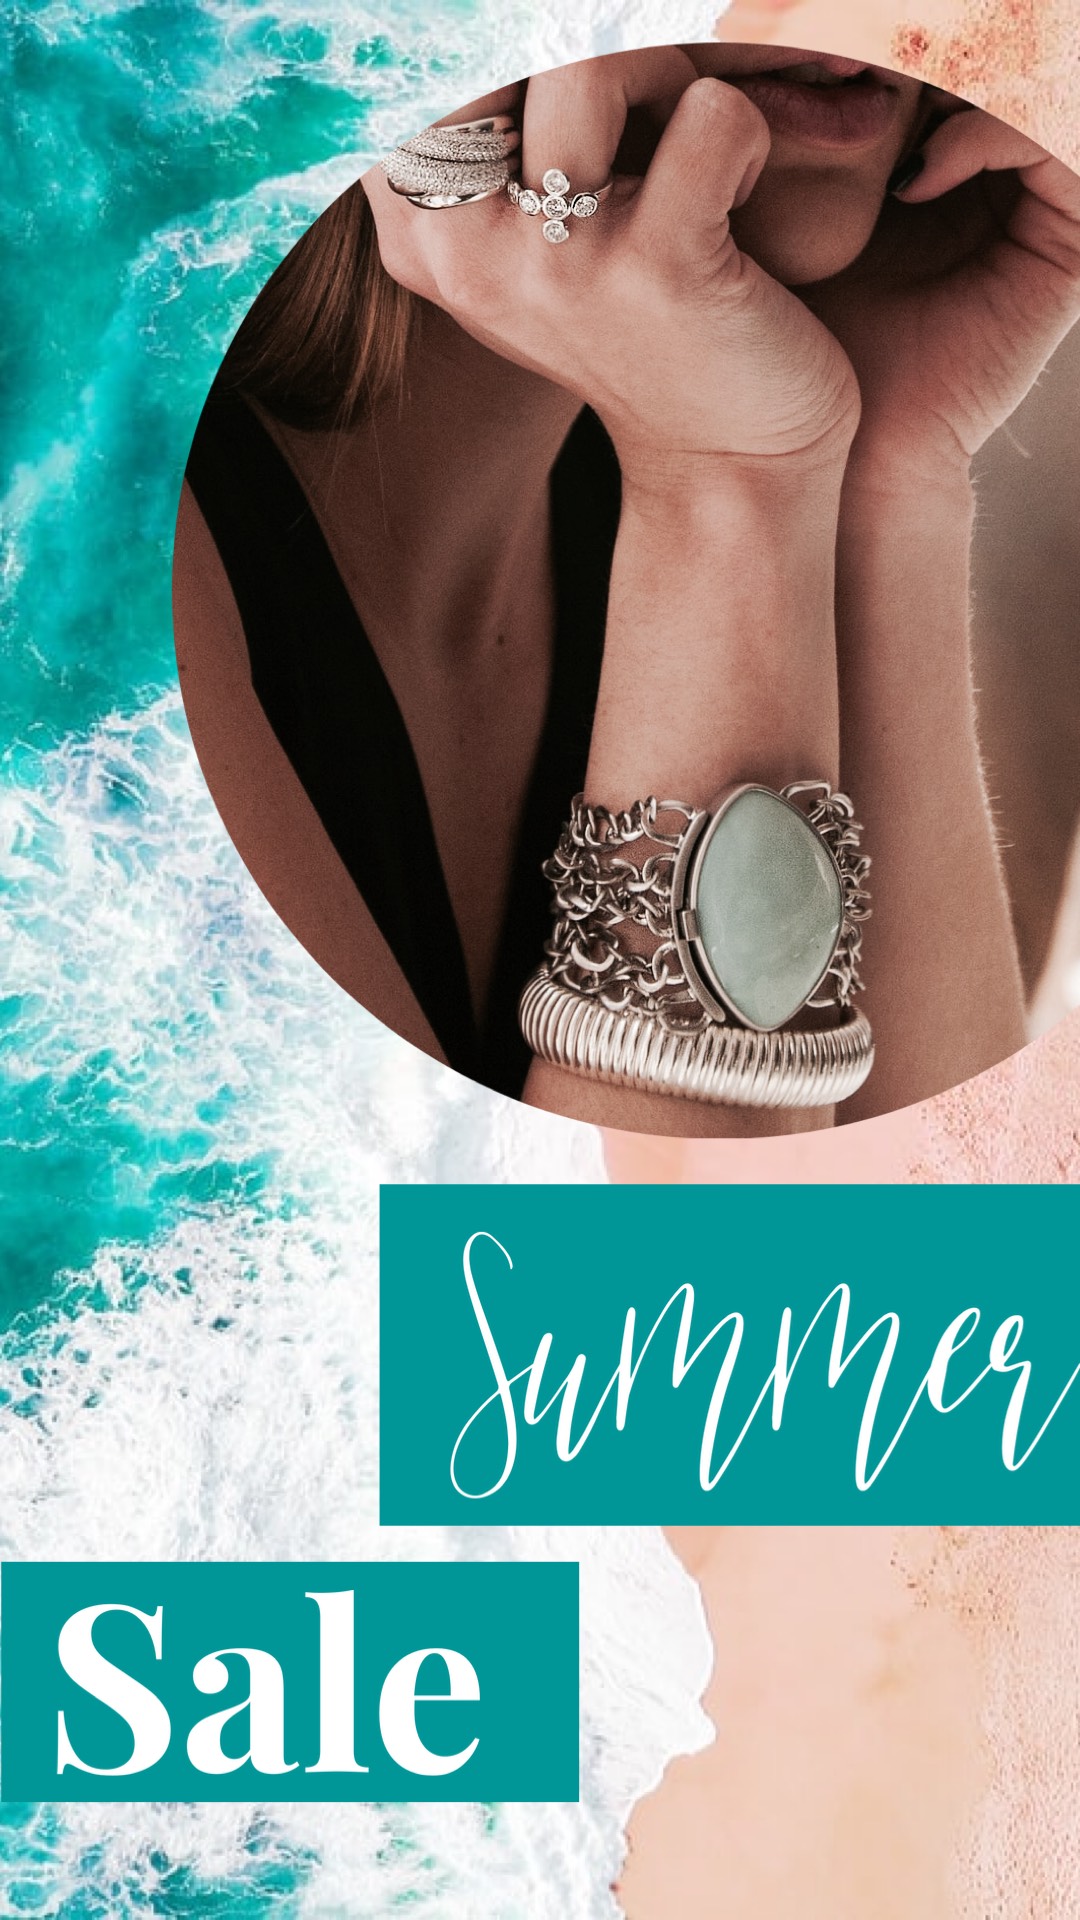 Ocean and jewelry summer sale flyer template